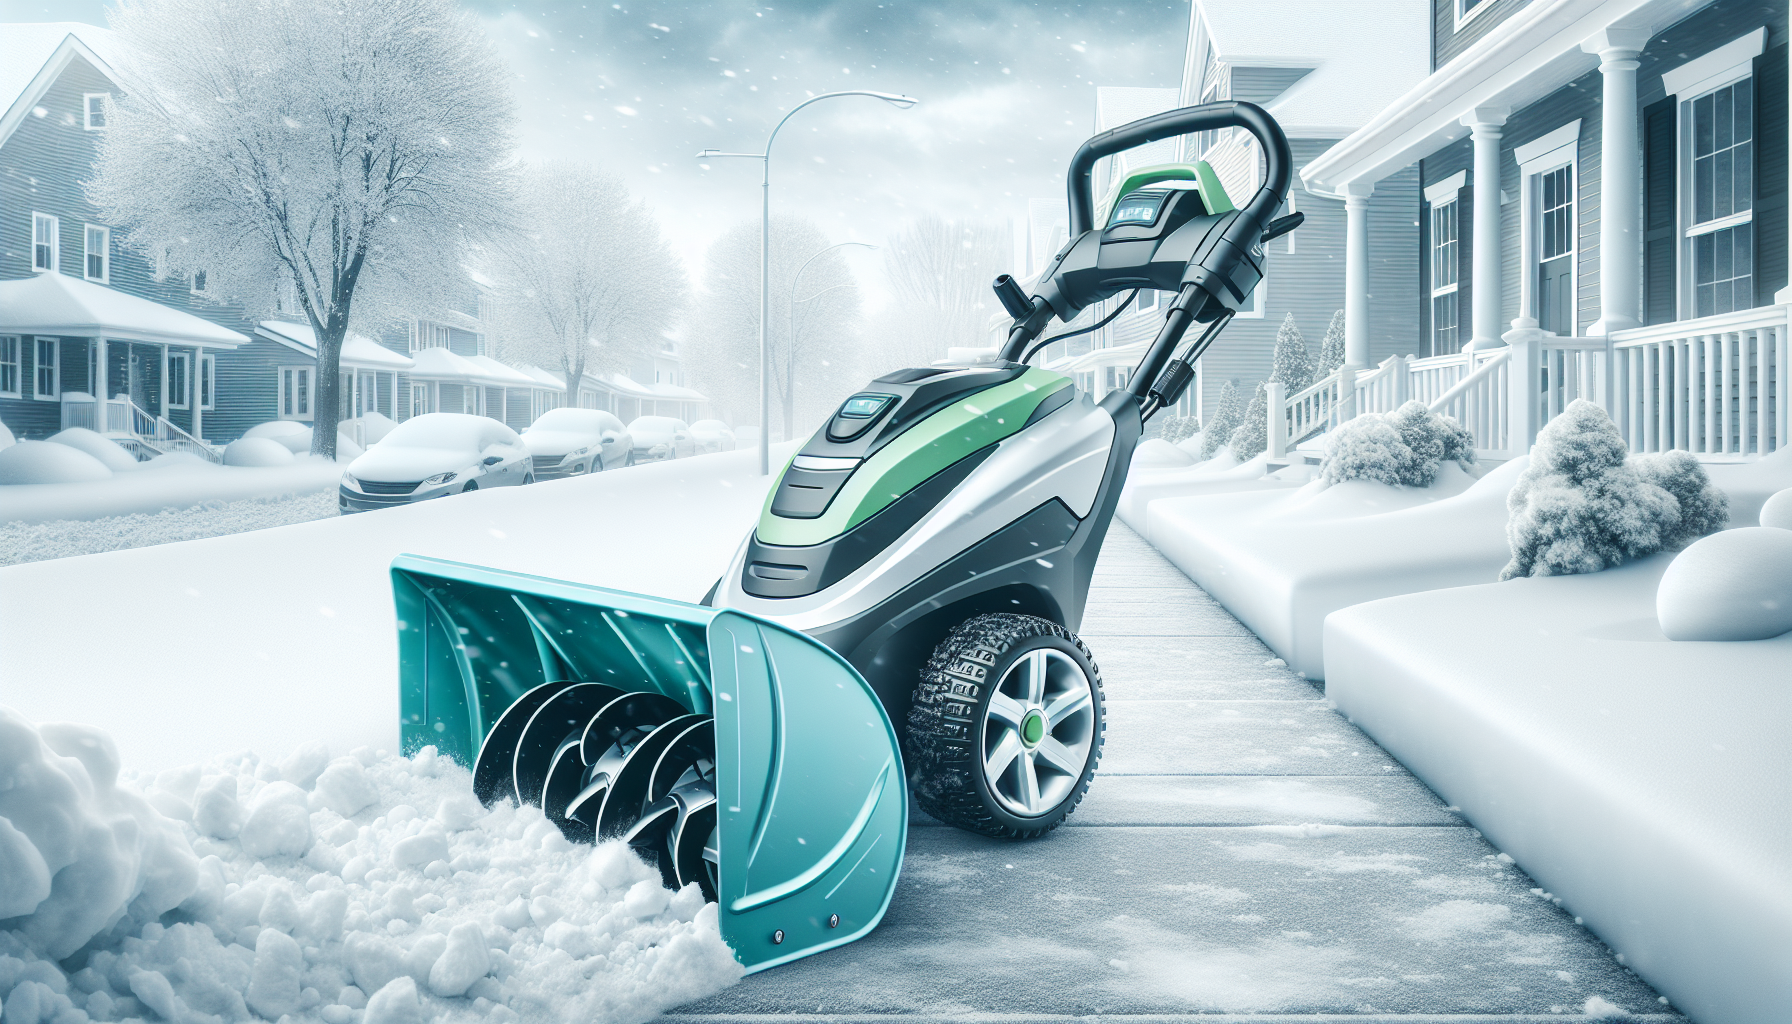 Are Electric Snow Blowers Effective?